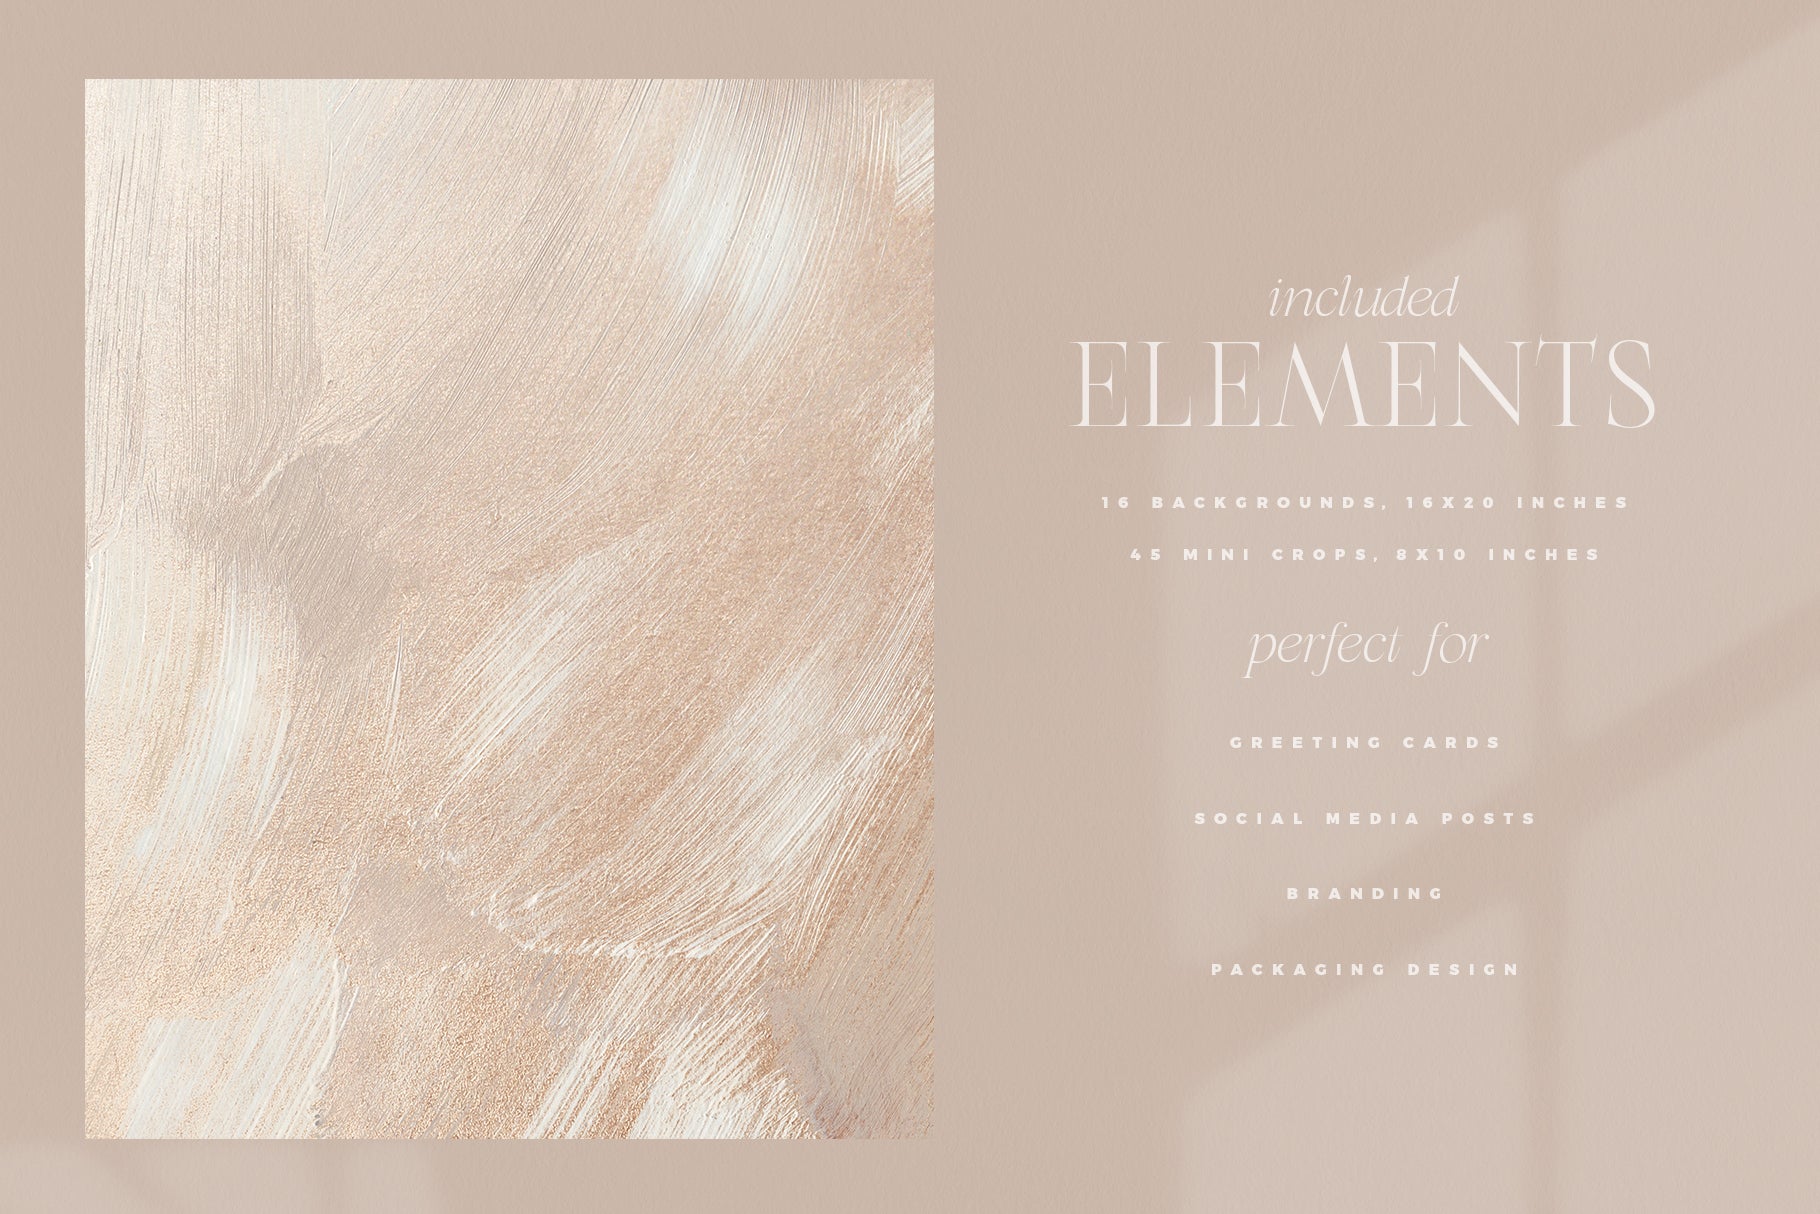 neutral and elegant abstract texture with product information on the right